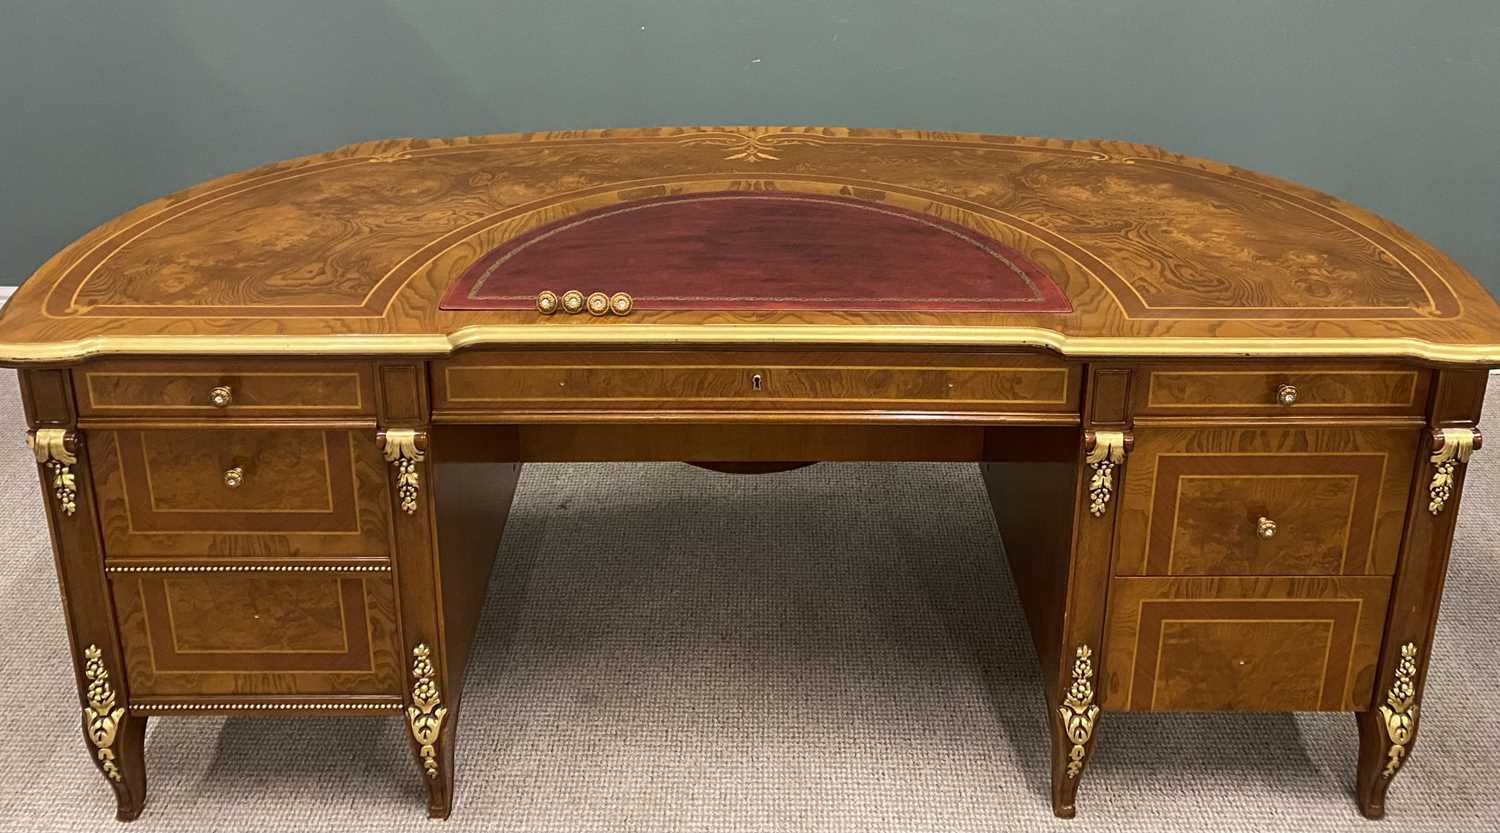 BARNINI OSEO EMPIRE-STYLE DEMI LUNE REGGENZA DESK, the shaped gilt edged top with various inlays - Image 2 of 7